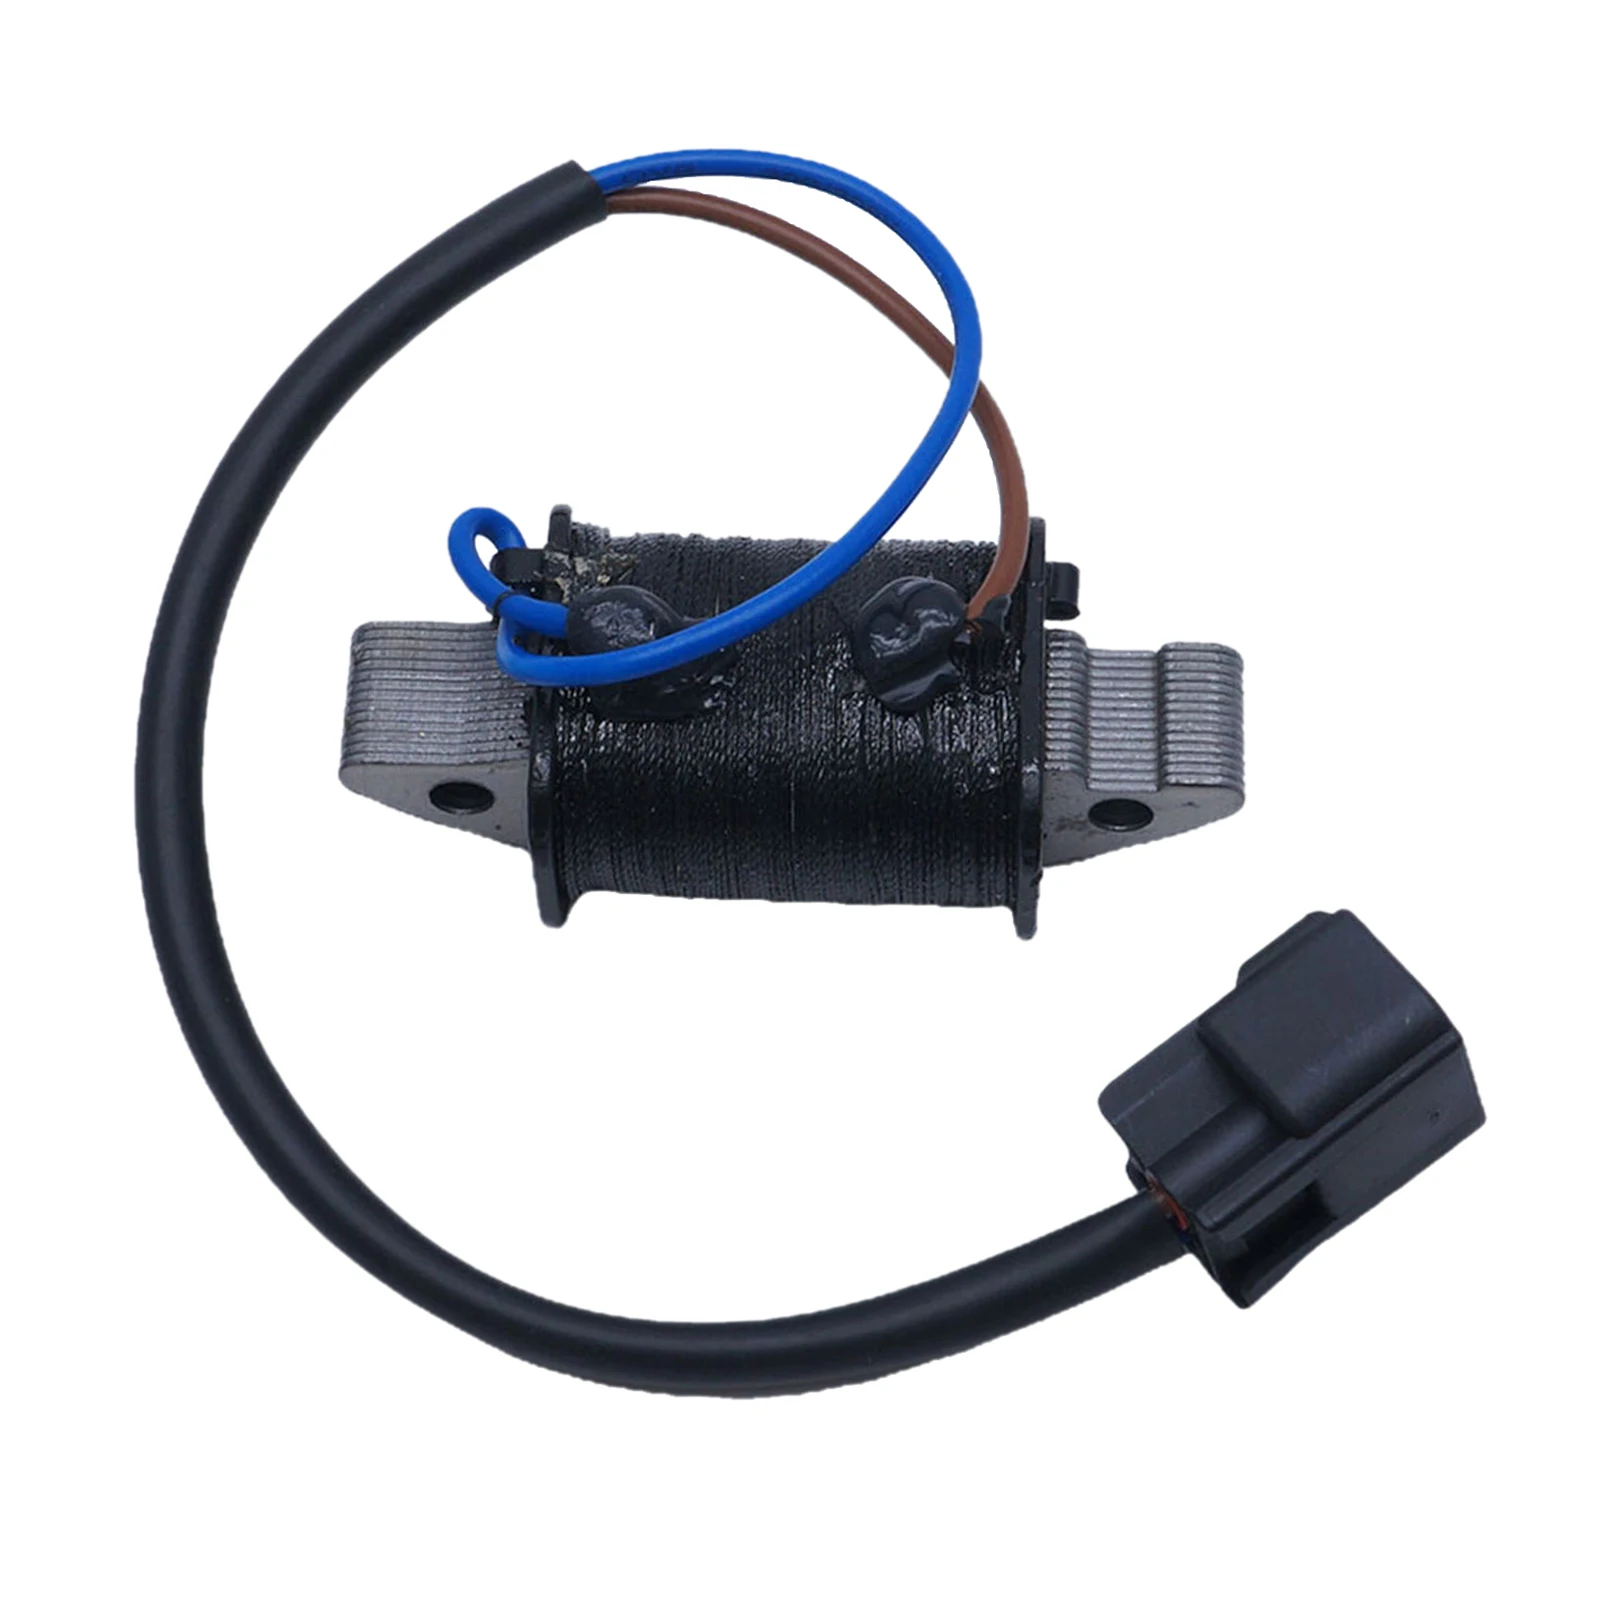 Charge Coil for Yamaha Boat Engine 70HP 60HP with Plug 6H2-85520-01-00, Easy To Install No Instruction